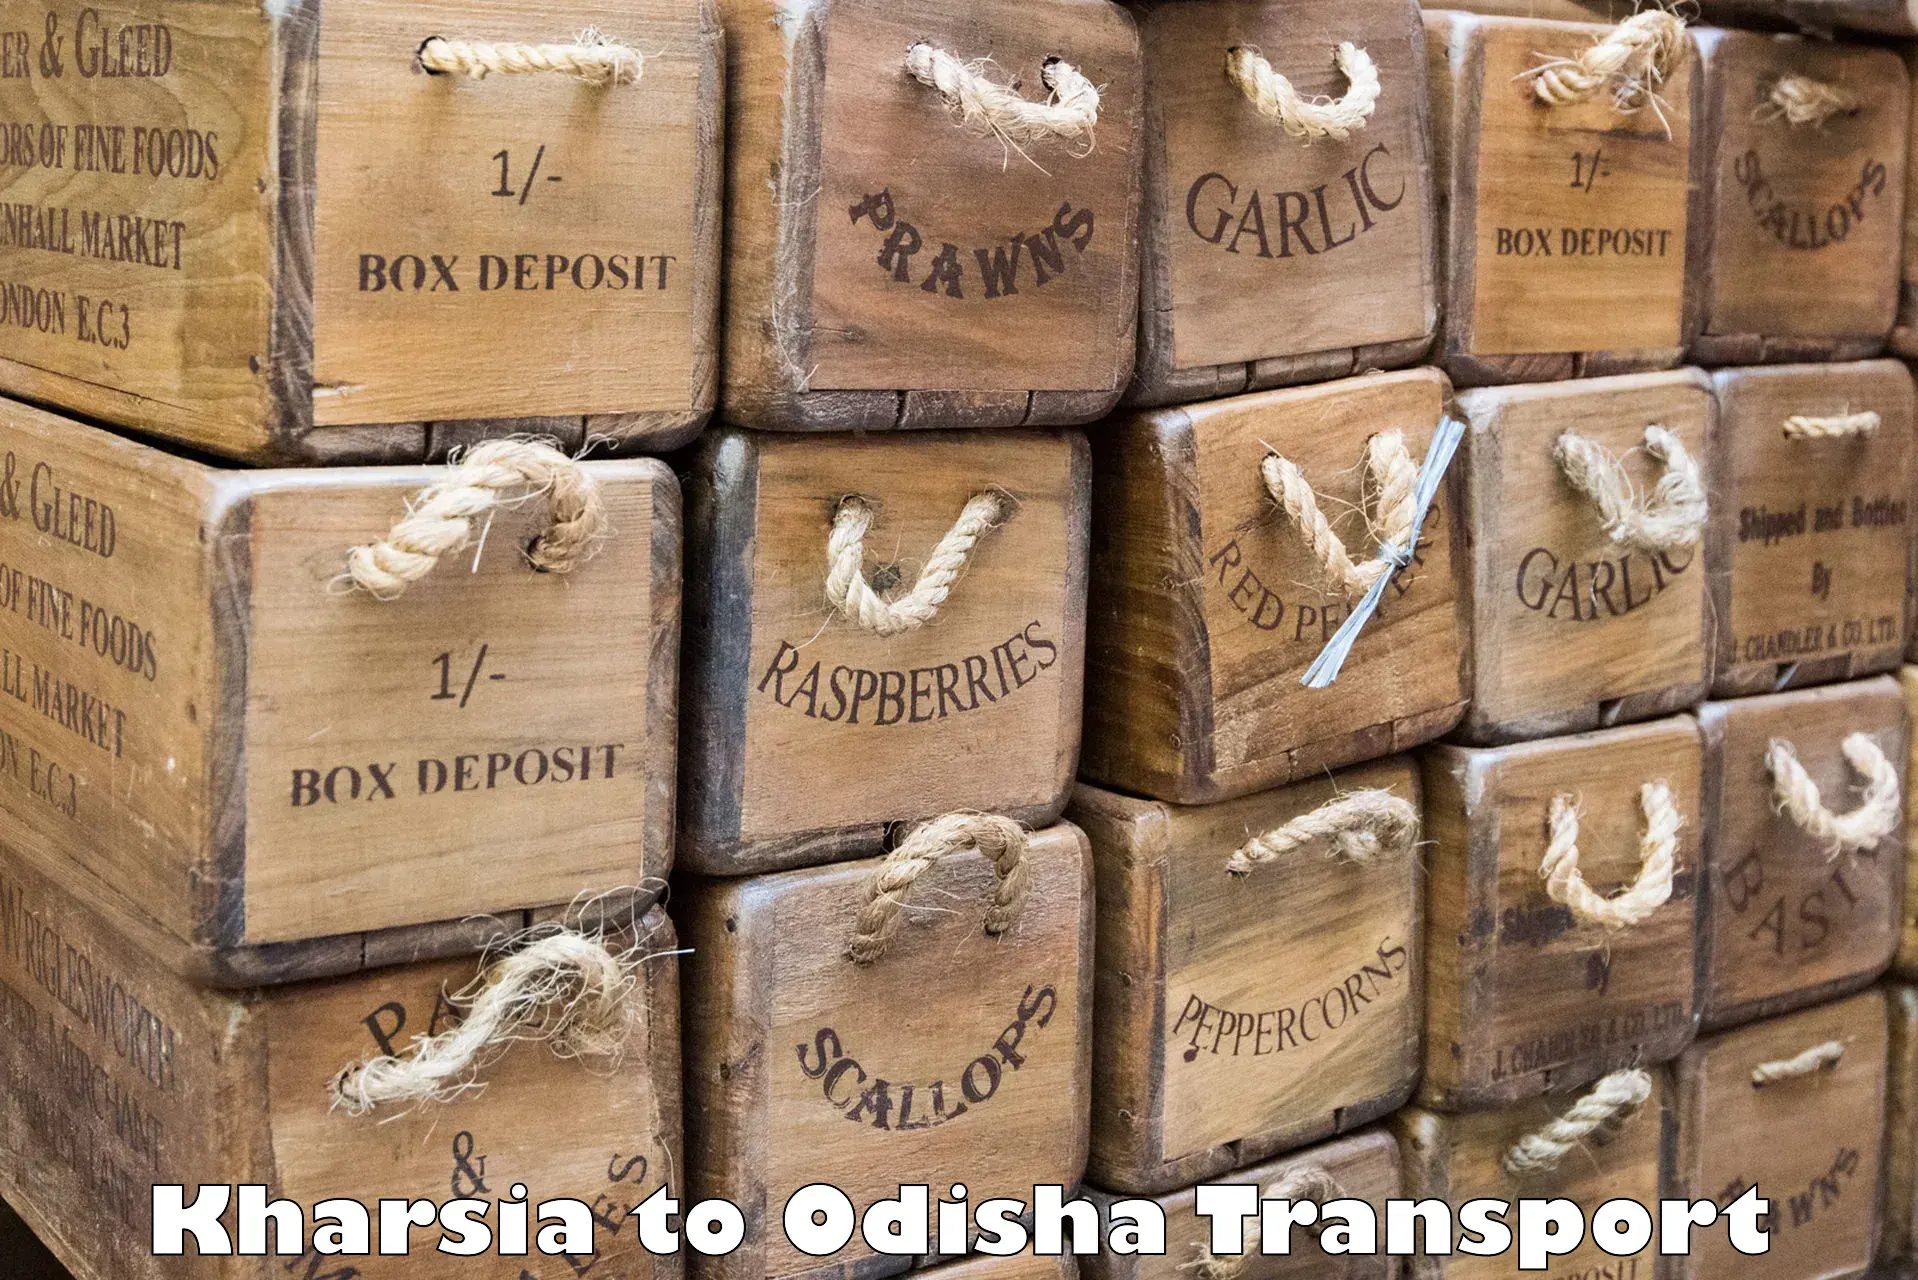 Truck transport companies in India Kharsia to Keonjhar